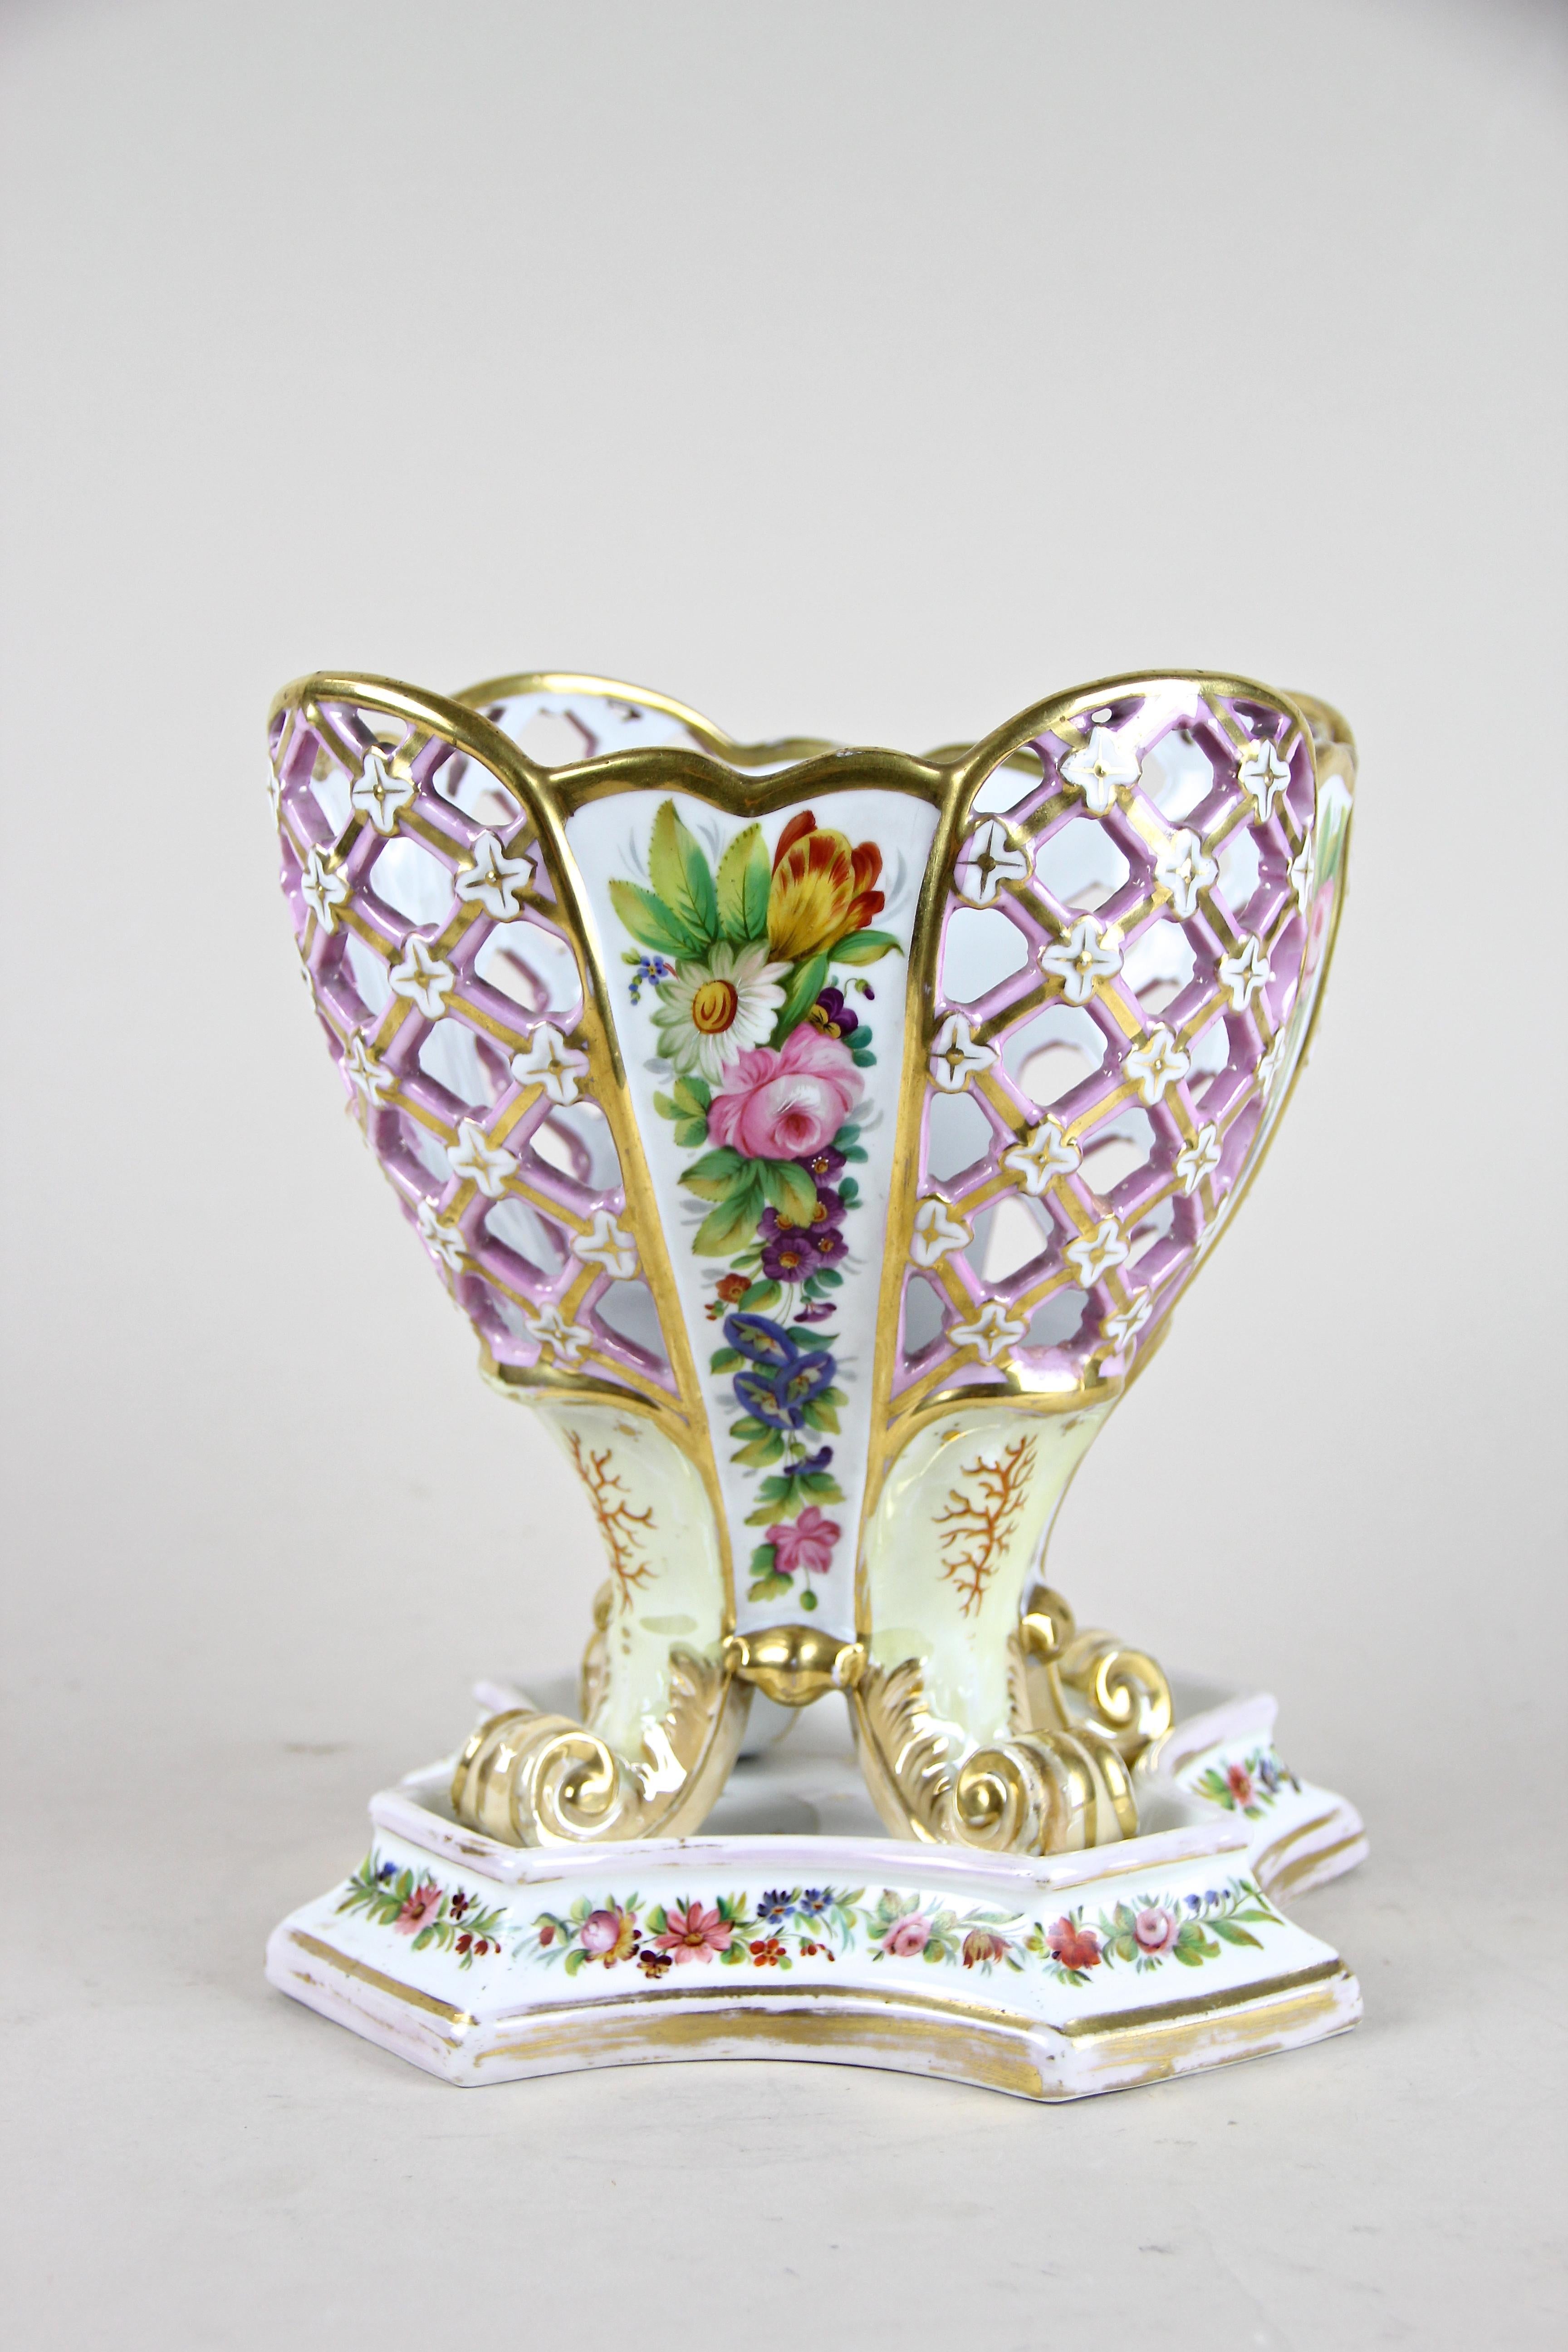 Absolute rare late bohemian Biedermeier Porcelain Basket by Fischer & Mieg, Pirkenhammer from circa 1860. By showing partly openwork sides, this decorative masterpiece stands on volute feet and impresses with a polychrome painted floral décor,